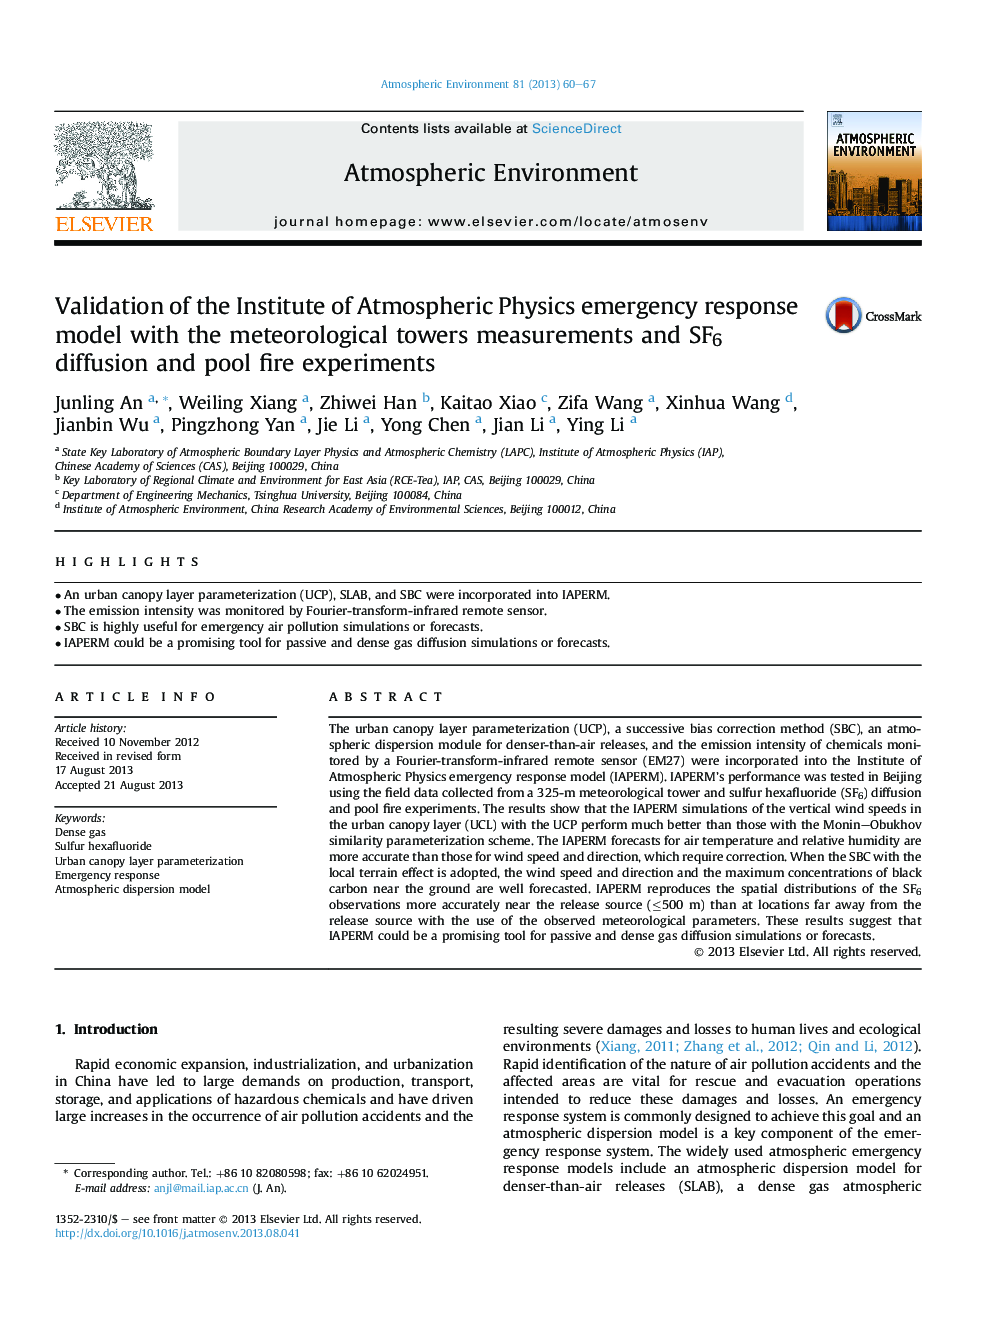 Validation of the Institute of Atmospheric Physics emergency response model with the meteorological towers measurements and SF6 diffusion and pool fire experiments